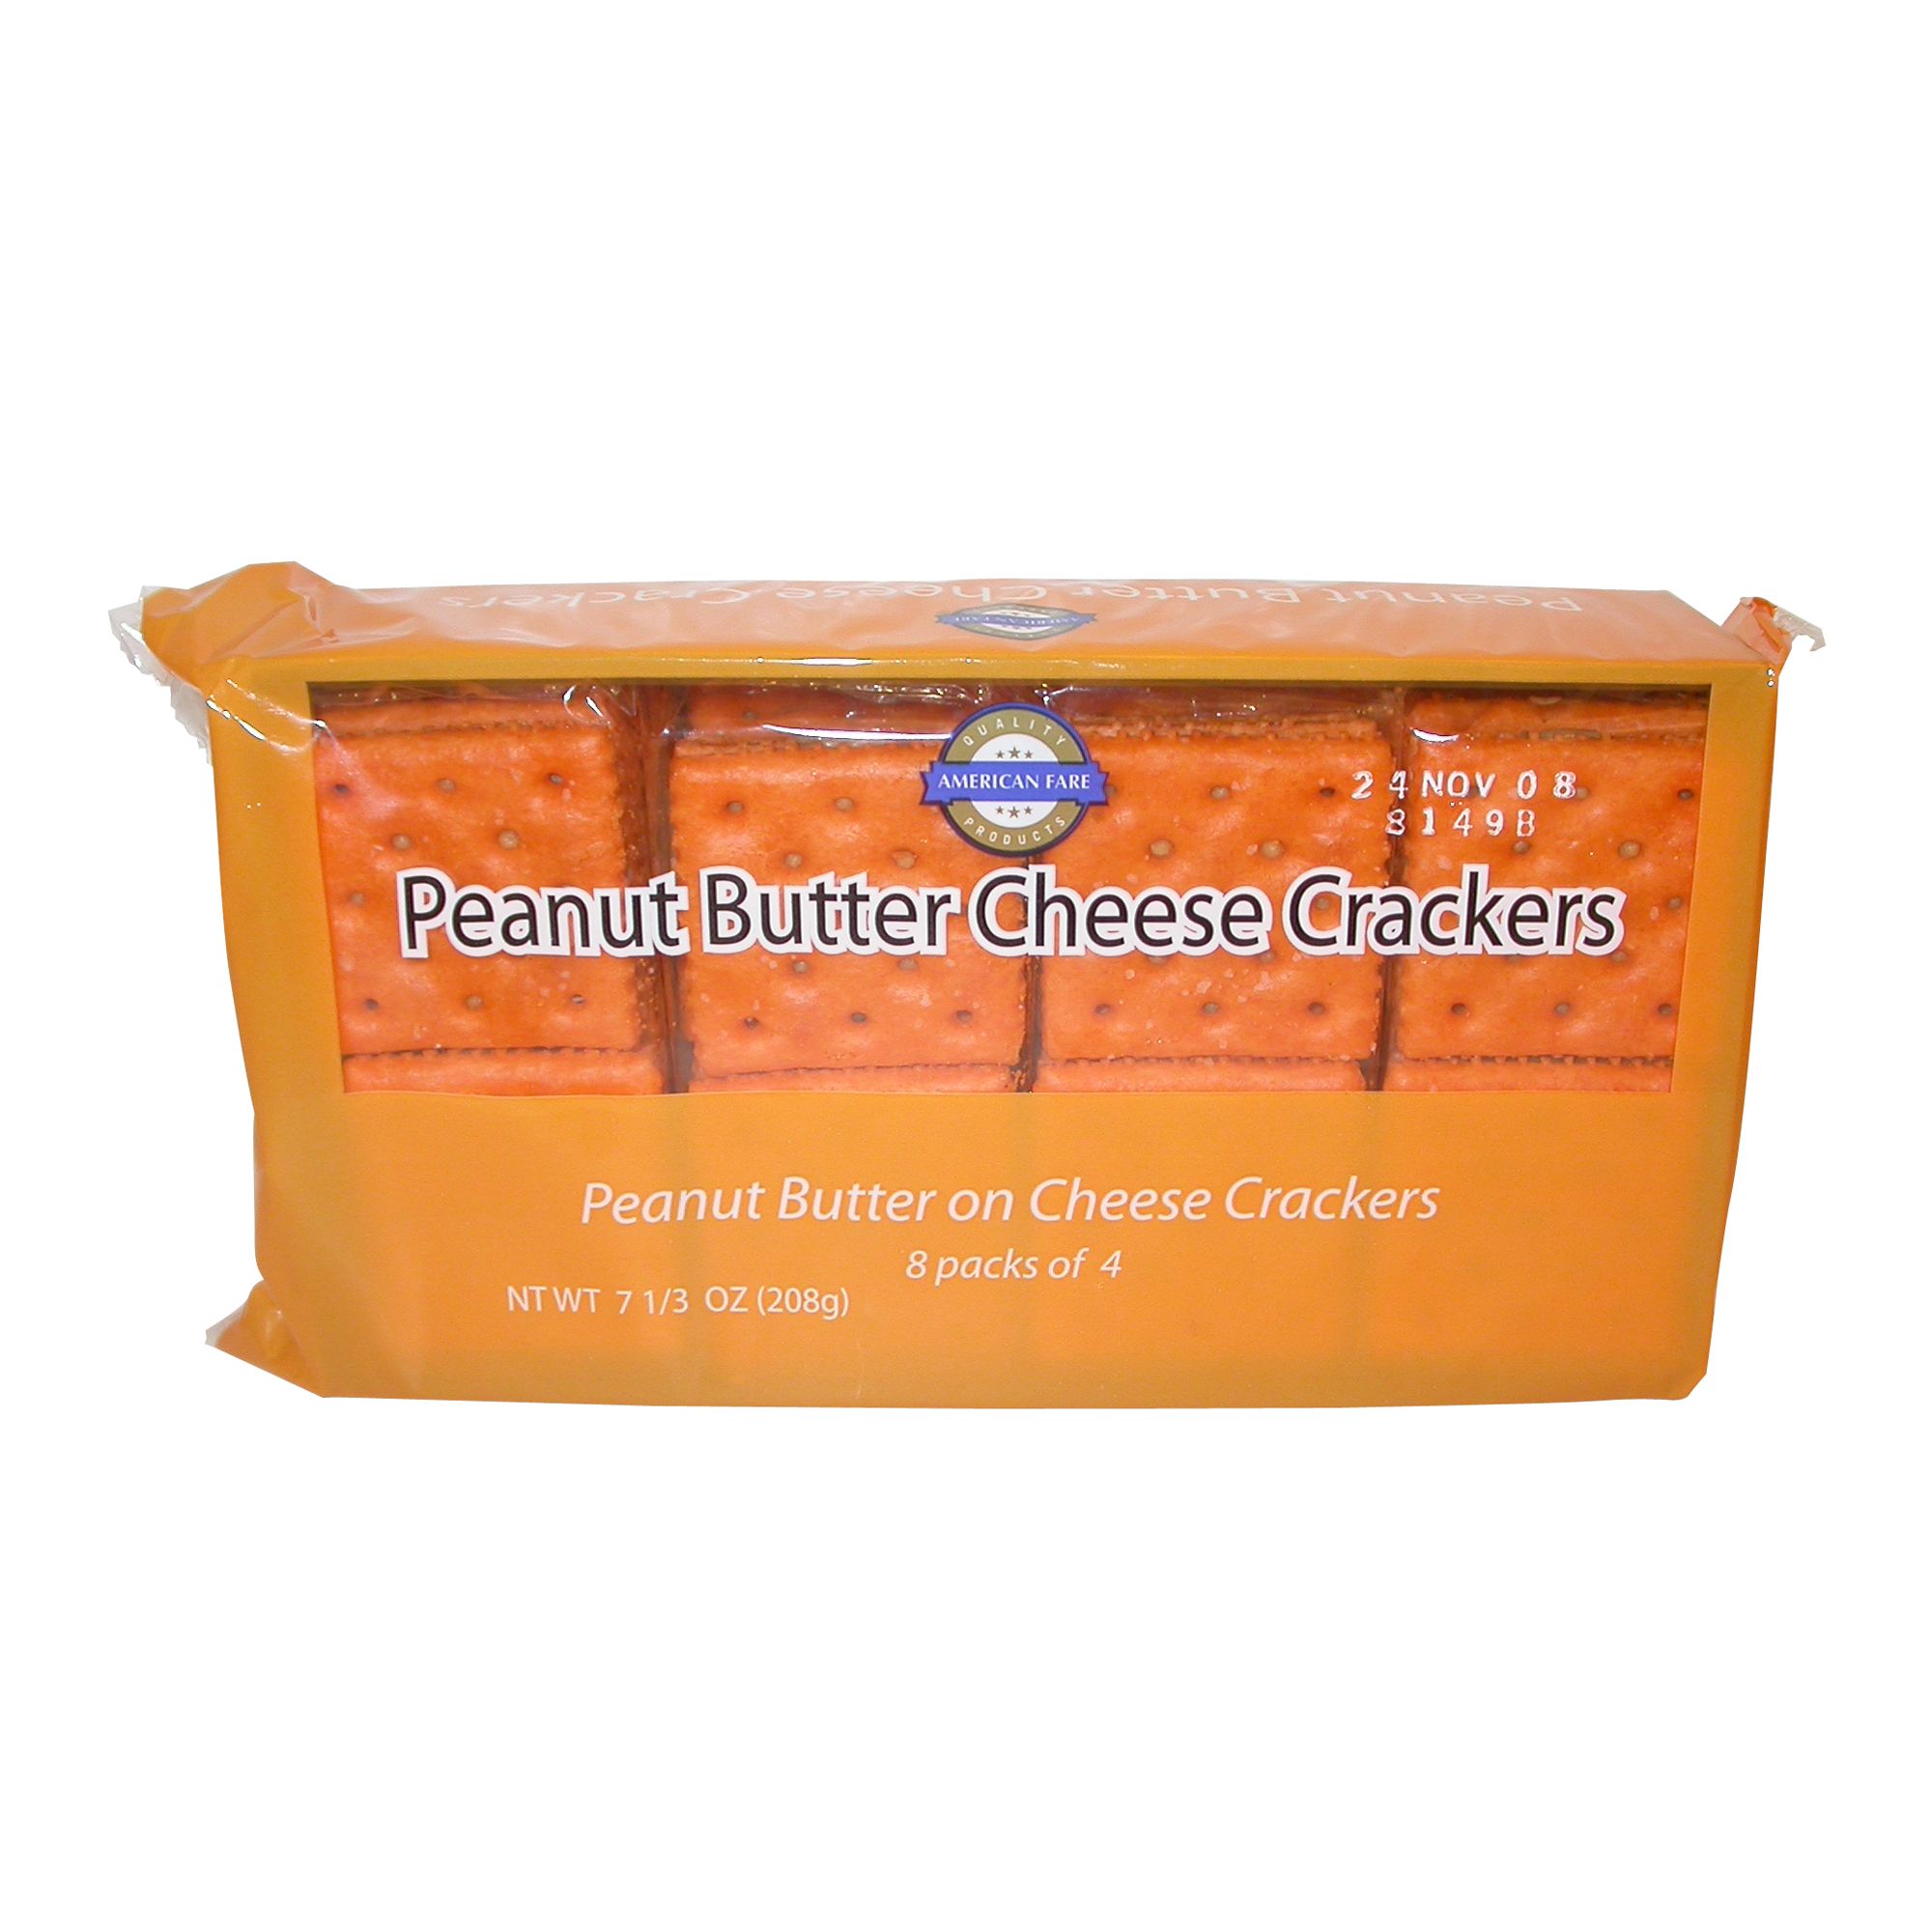 American Fare Peanut Butter Cheese Crackers 7.33 Ounce 8 Pack